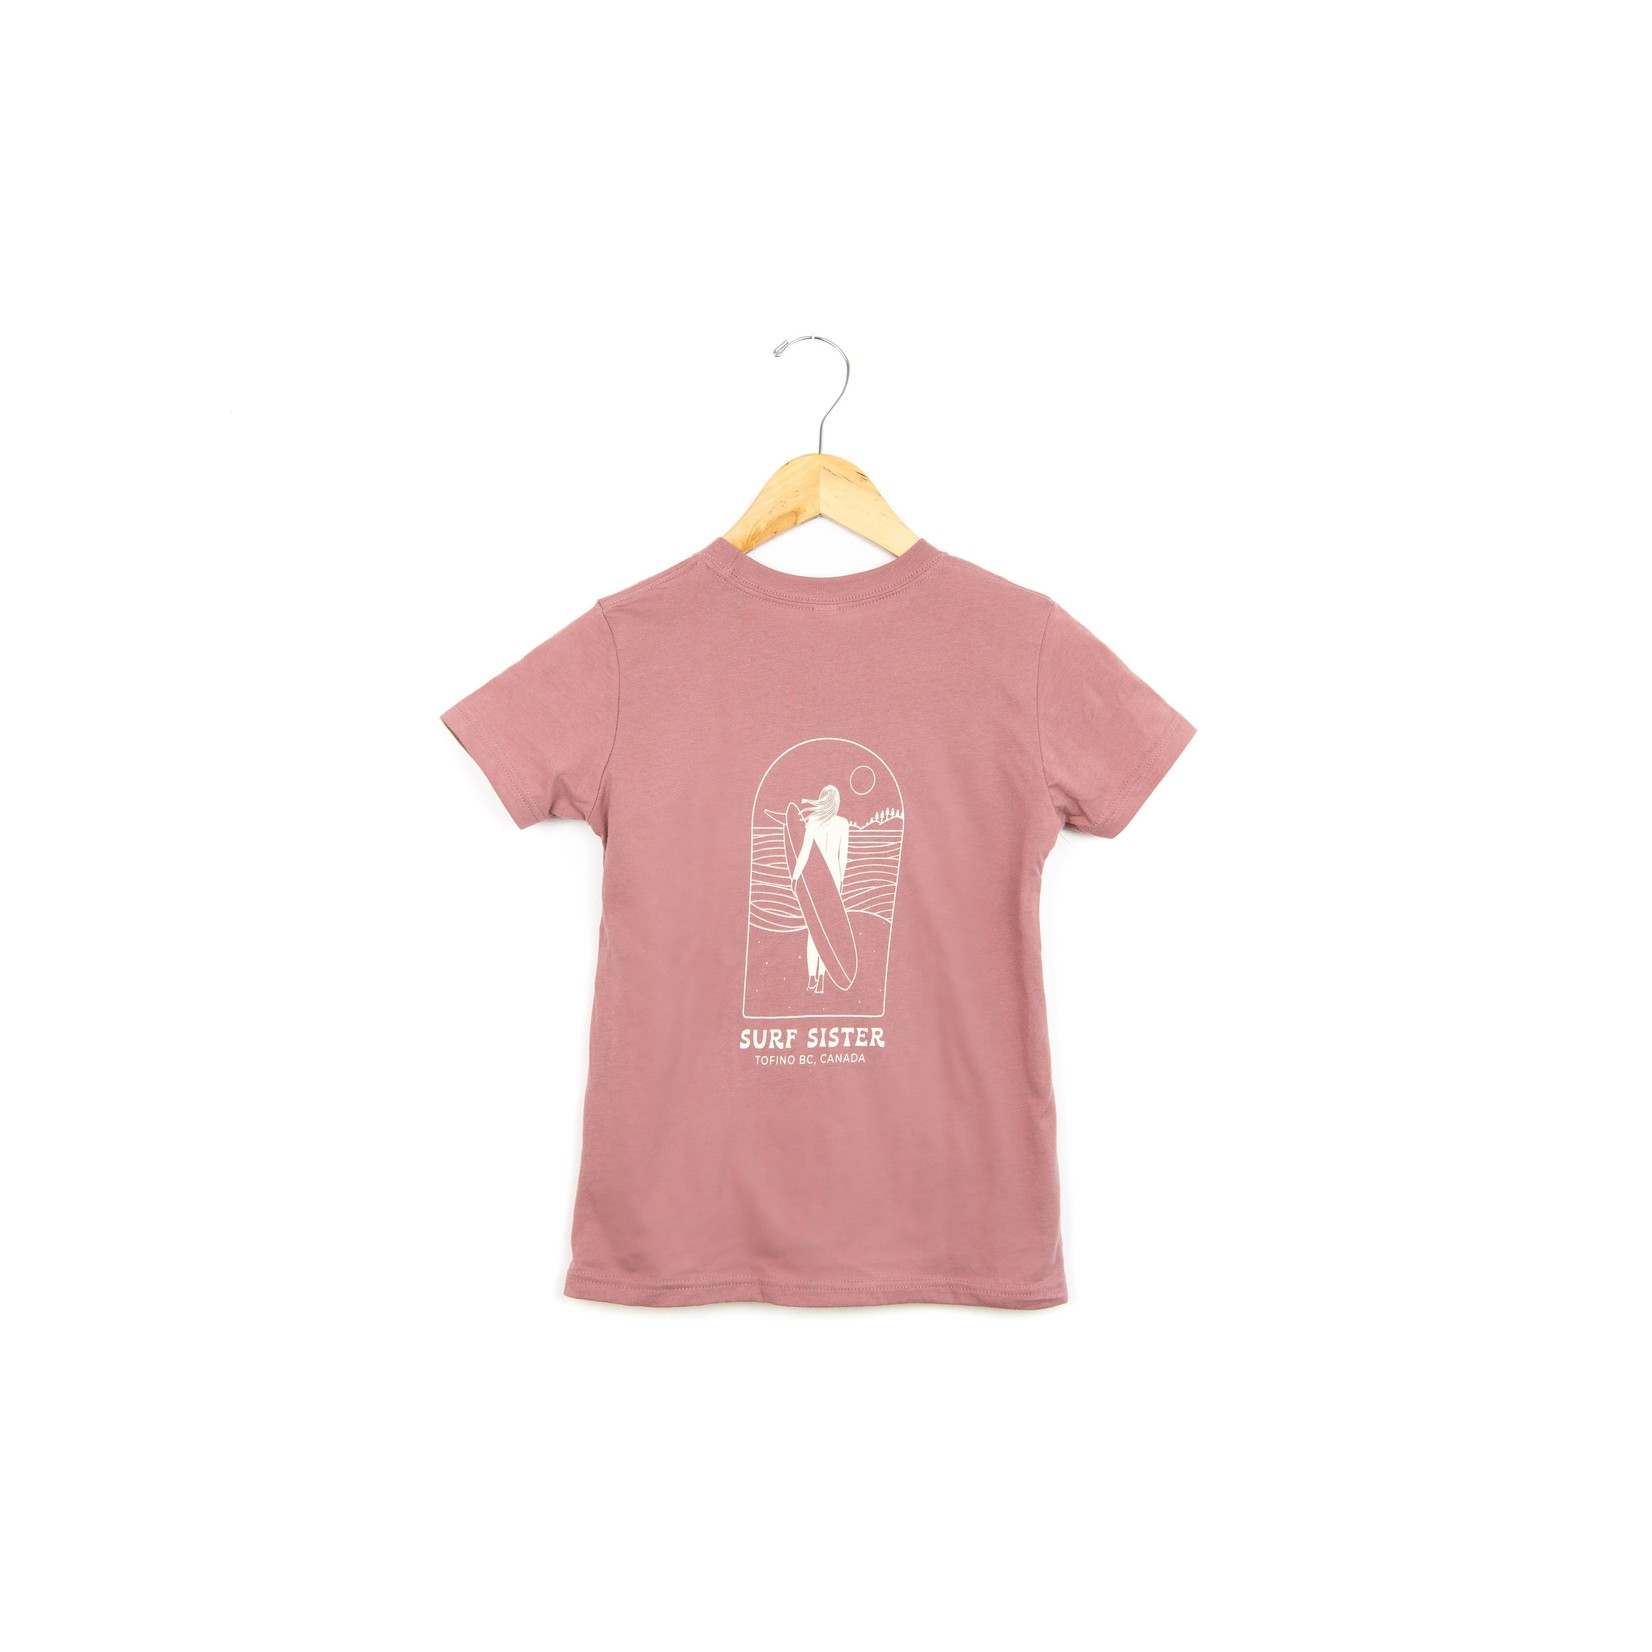 Surf Sister SURF SISTER YOUTH T